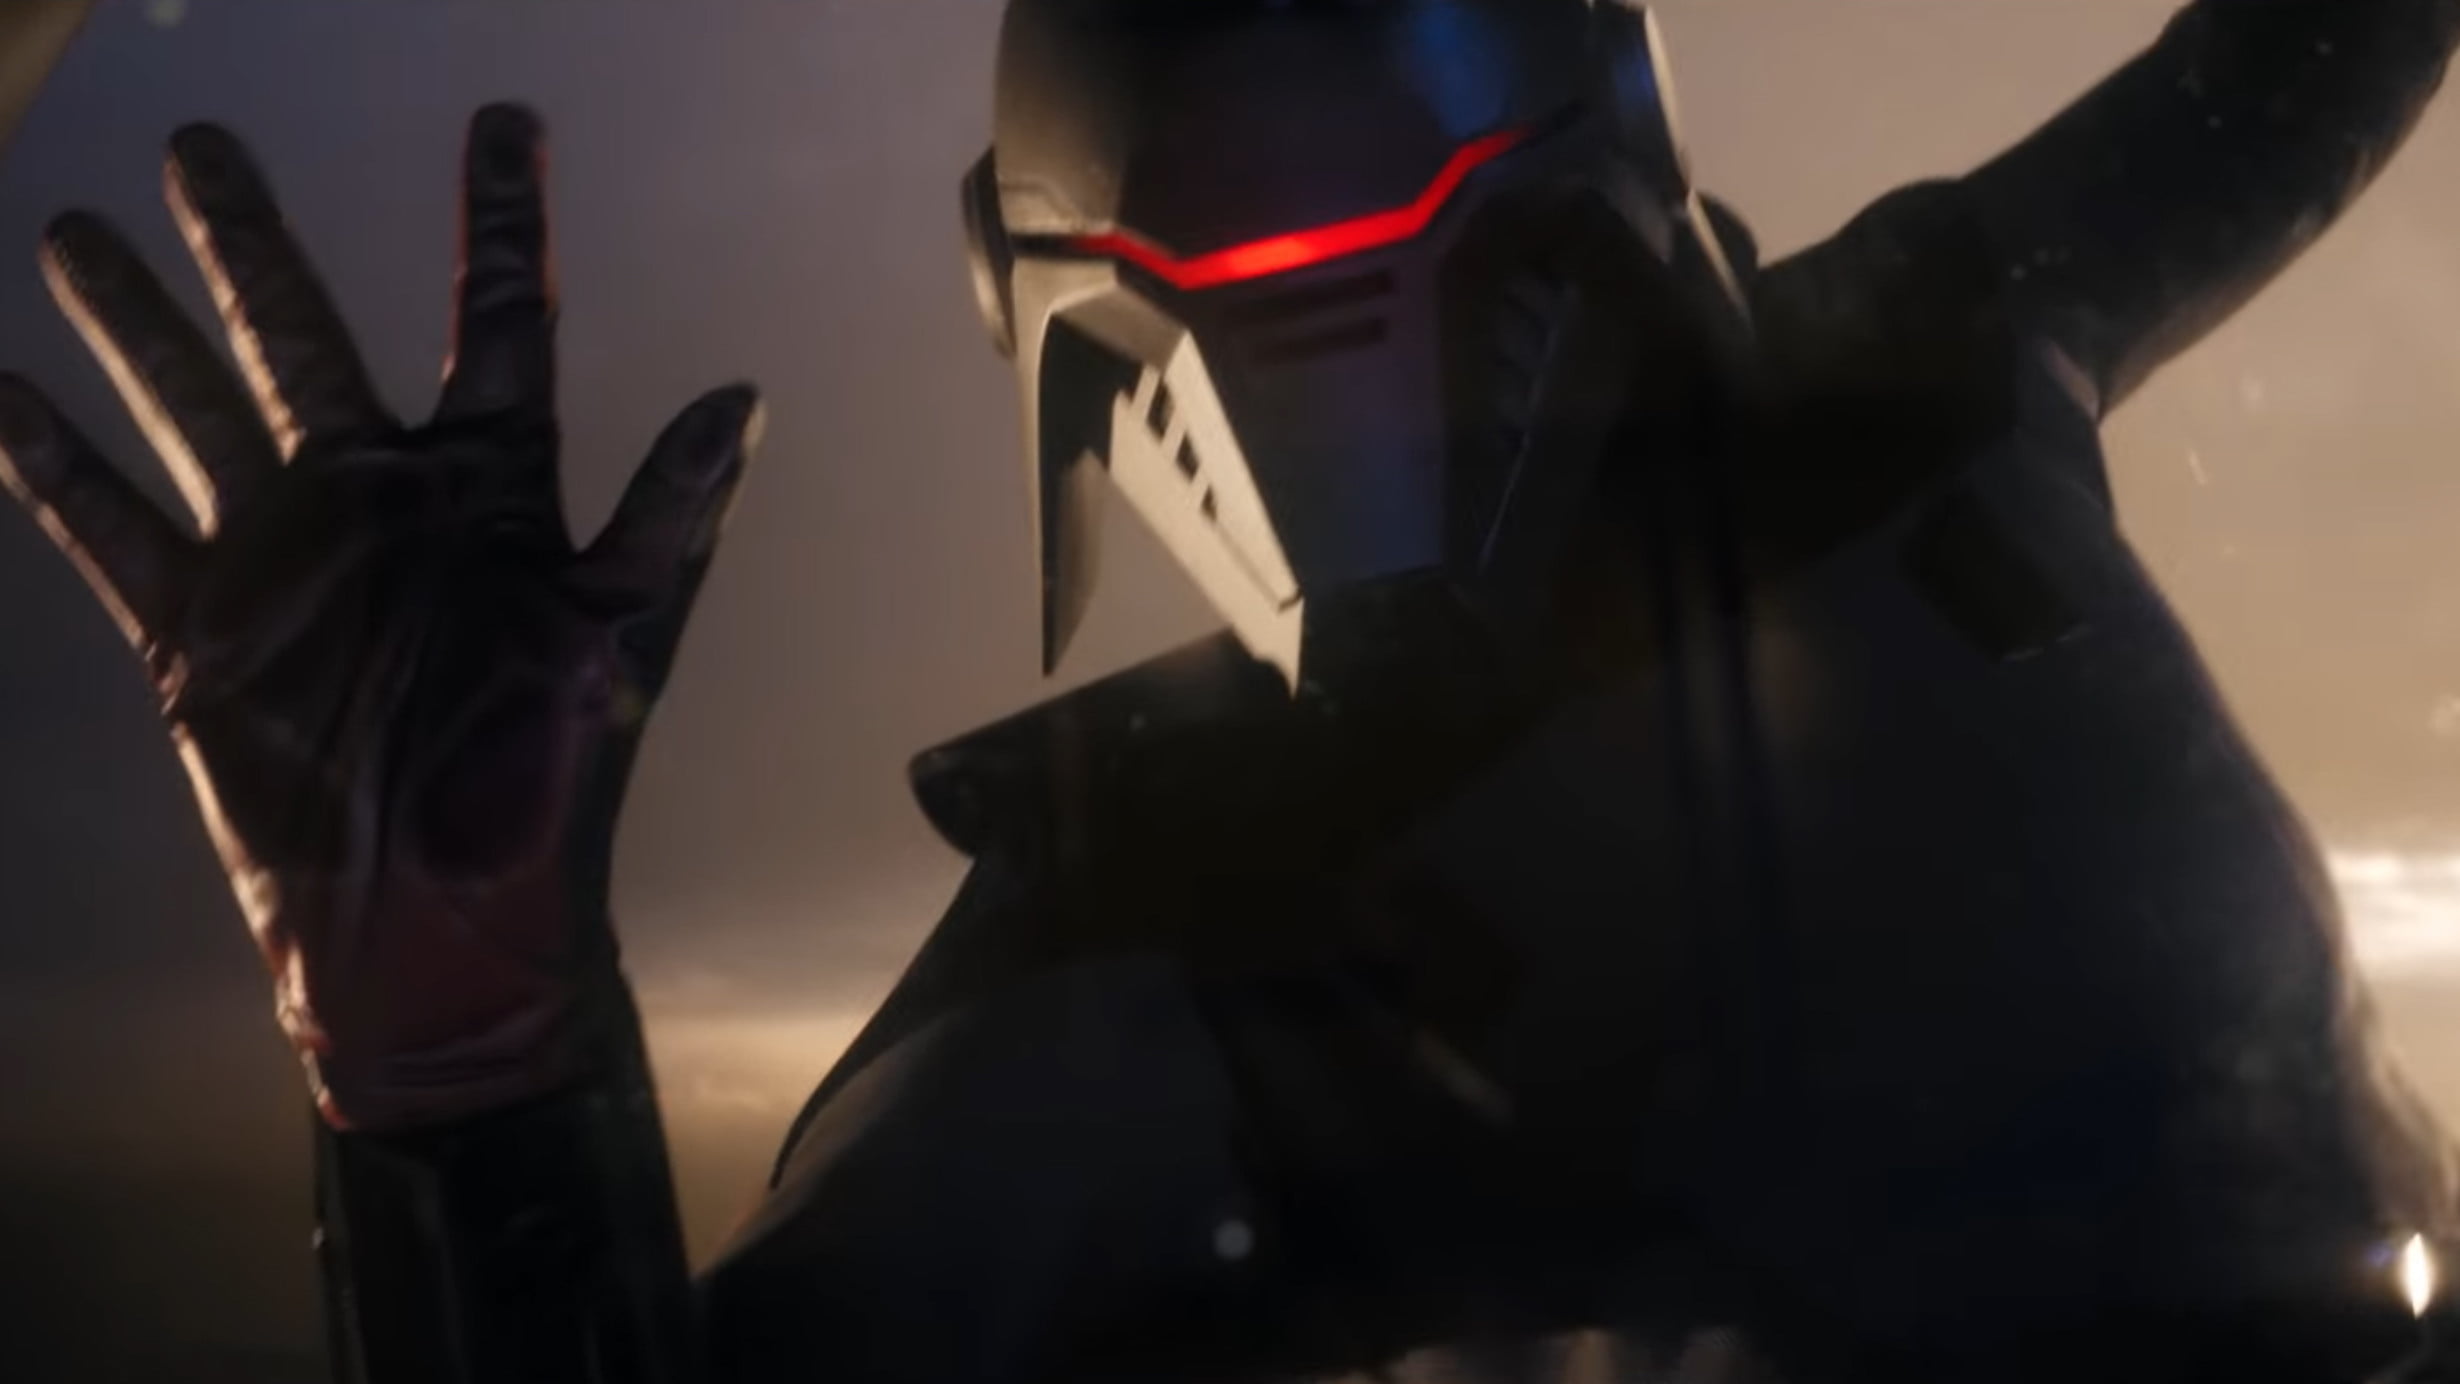 Star Wars Jedi: Fallen Order Release Date, Storyline, Characters and more Revealed by EA